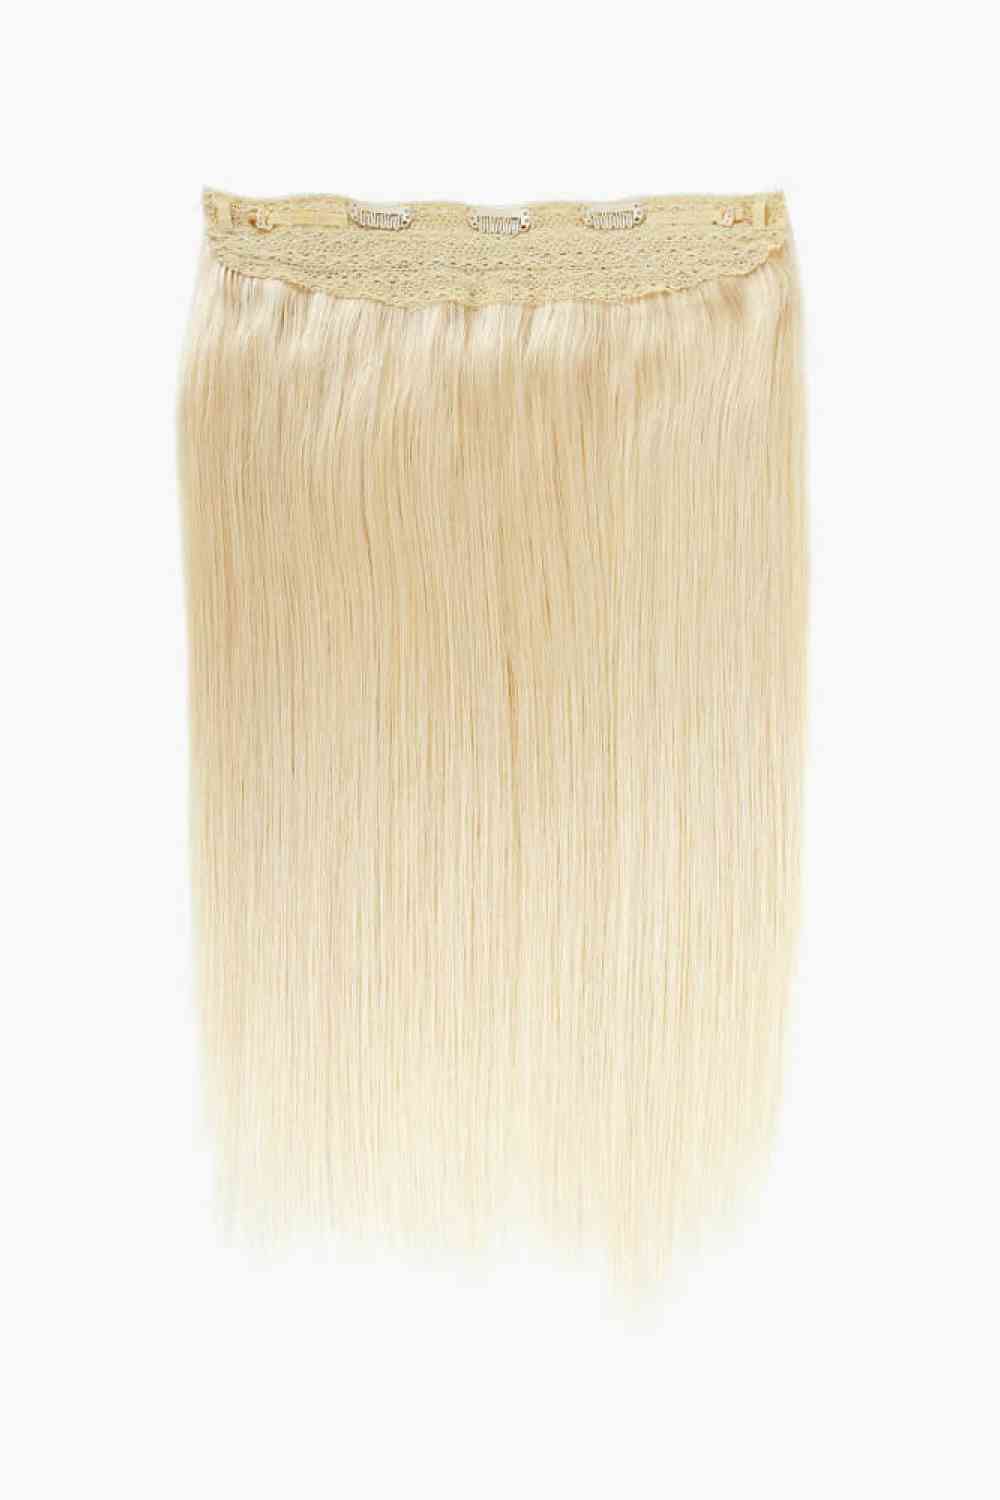 18" 80g Long Straight Indian Human Halo Hair Blonde One Size 